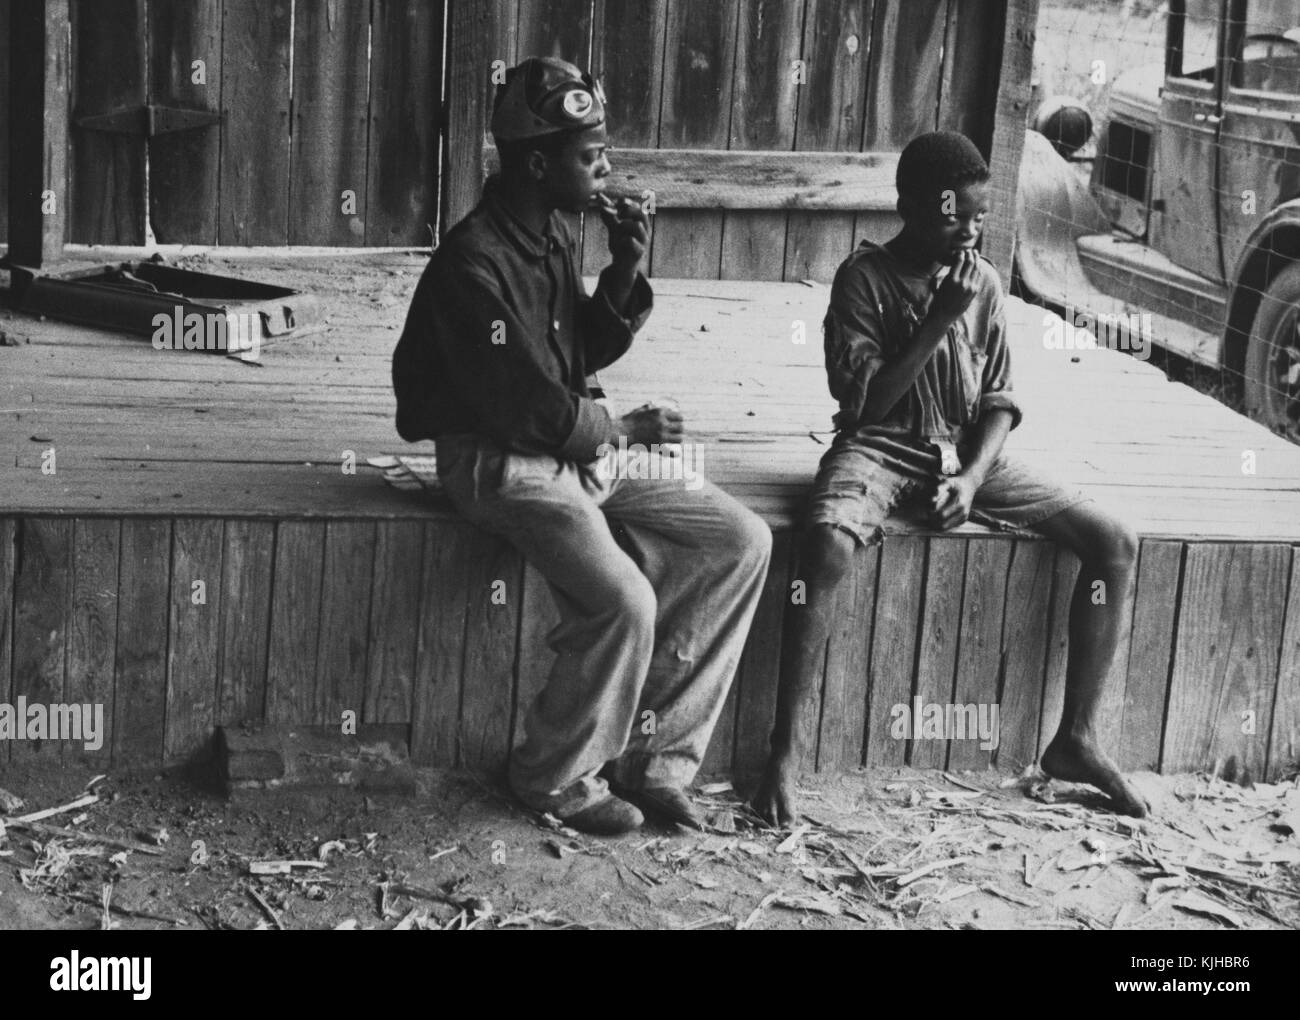 Black and white photograph of two homeless African-American boys, sitting, by Ben Shahn, Lithuanian born, American artist known for his work for the Farm Security Administration documenting the effects of the Great Depression, Natchez, Mississippi, 1935. From the New York Public Library. Stock Photo